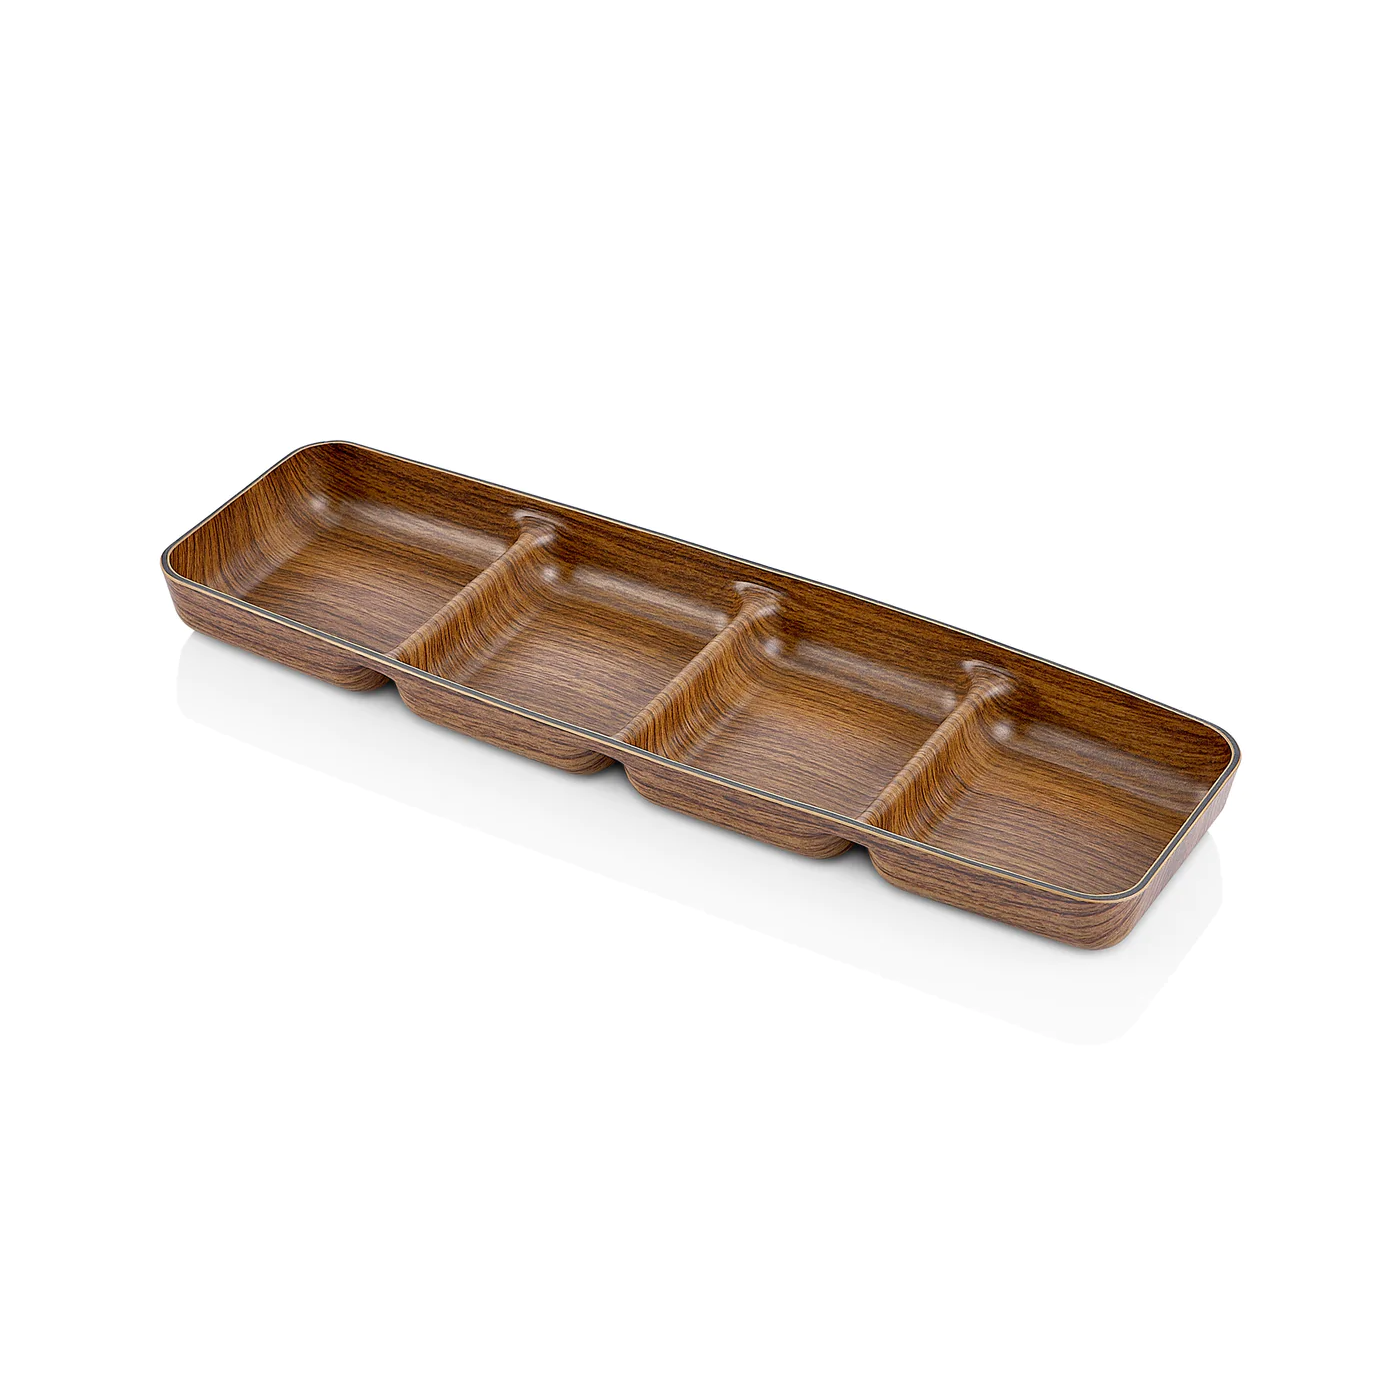 X Large Snack Dish With Wooden Finish - Lunaz Shop